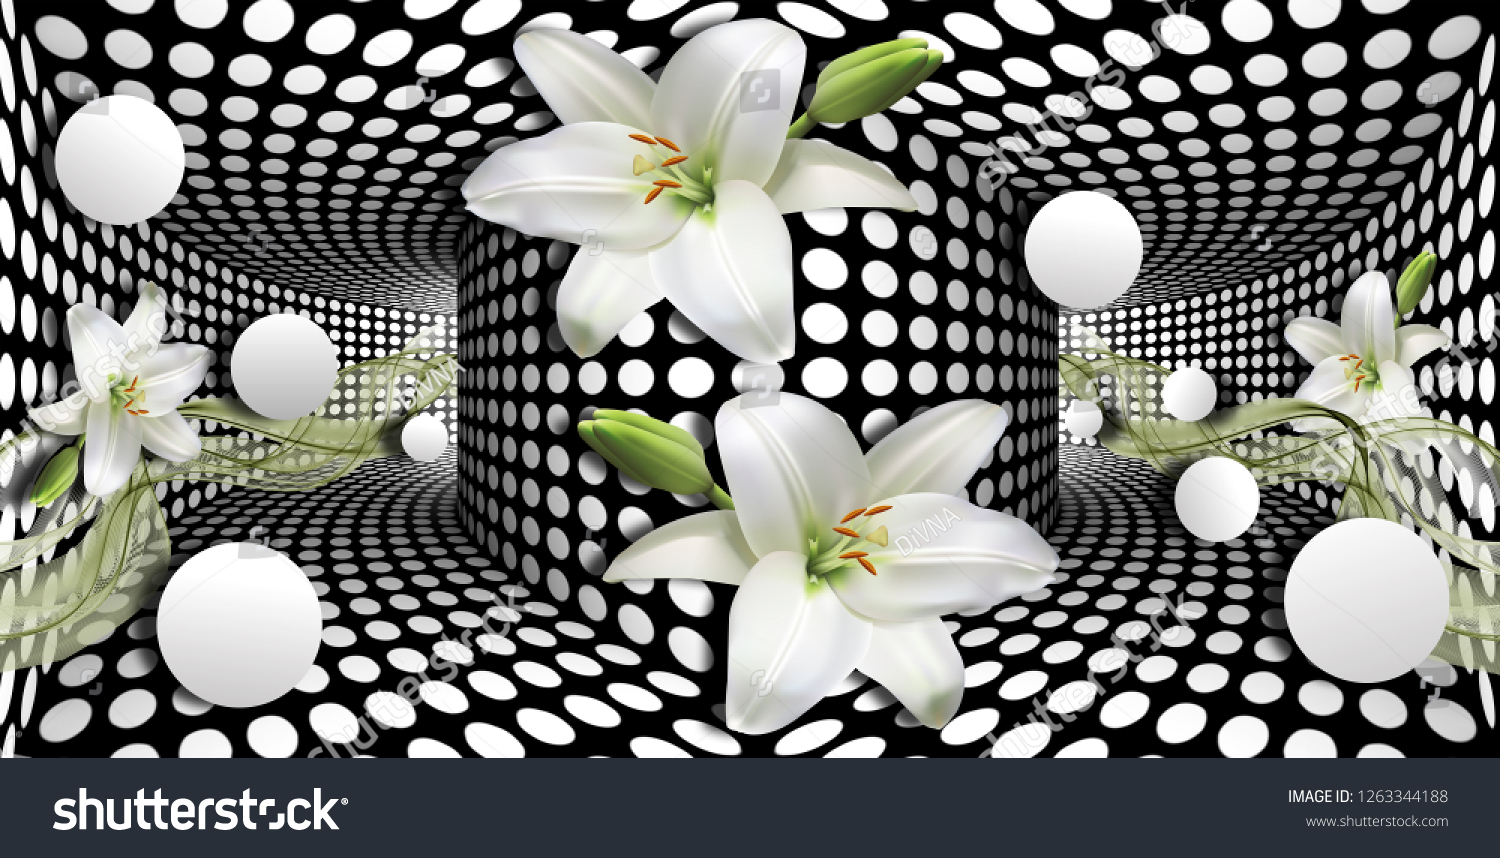 3d wallpaper, white calla lilies and sphere on optical illusions background